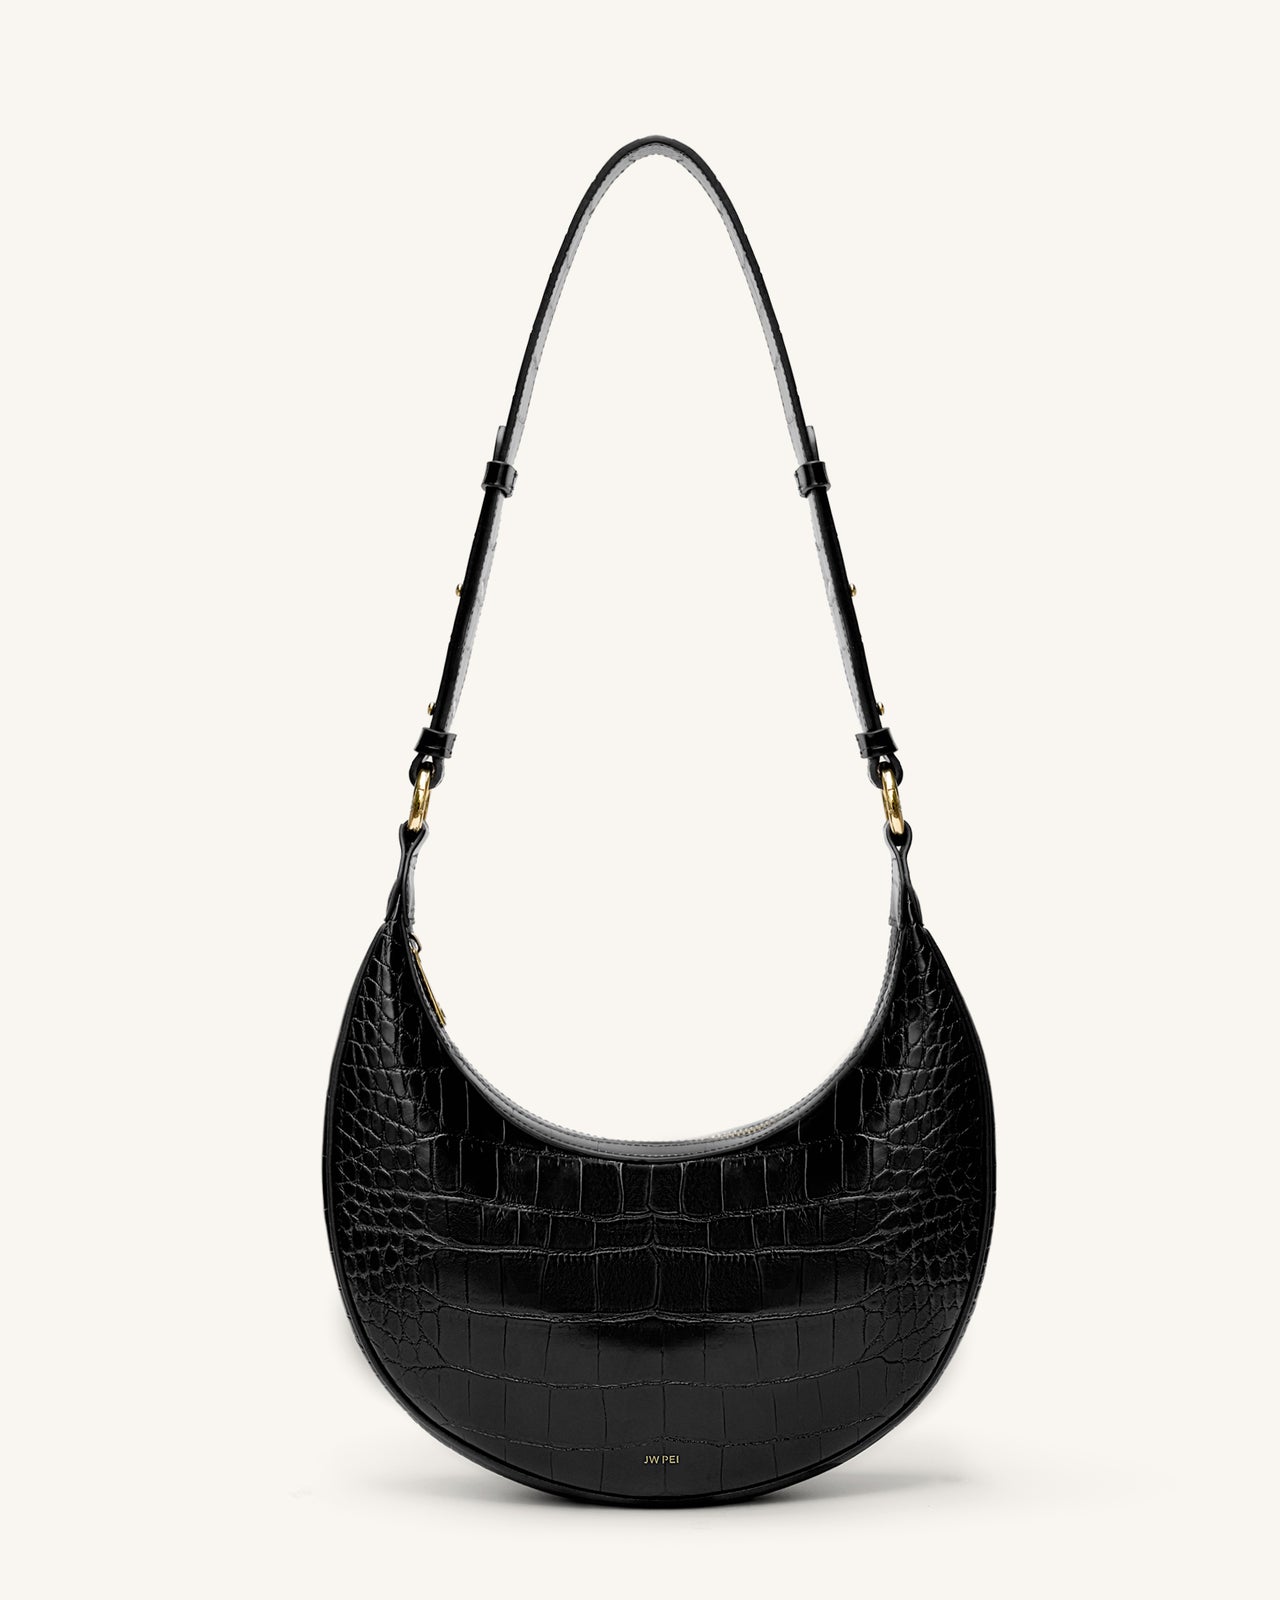 Dropship NEW JW PEI Black Abacus Vegan Leather Shoulder Bag to Sell Online  at a Lower Price